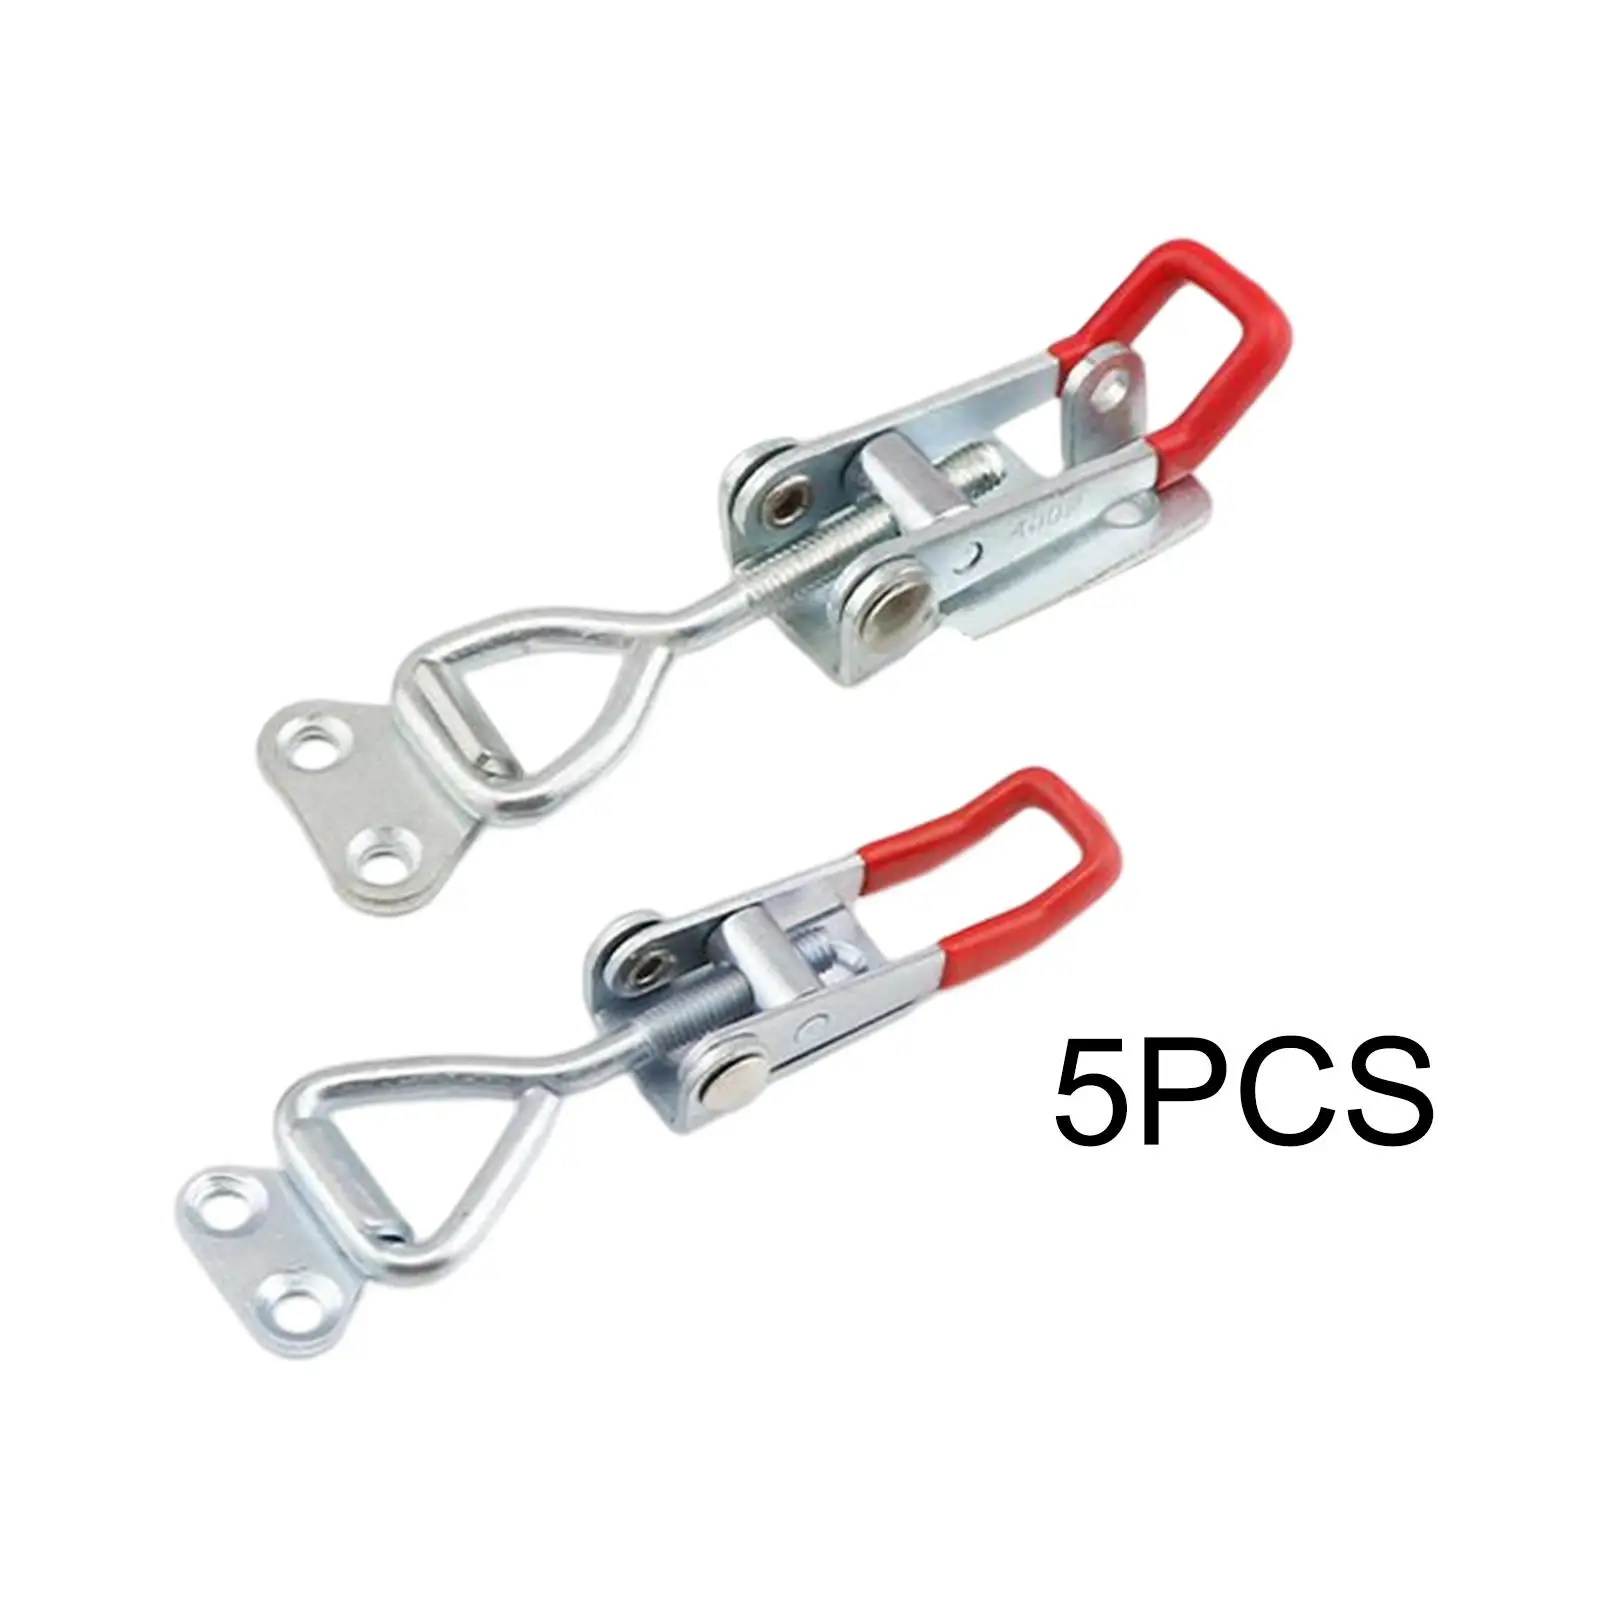 5 Pieces Toggle Clamp Iron Toggle Clamp for Storage Locker DIY